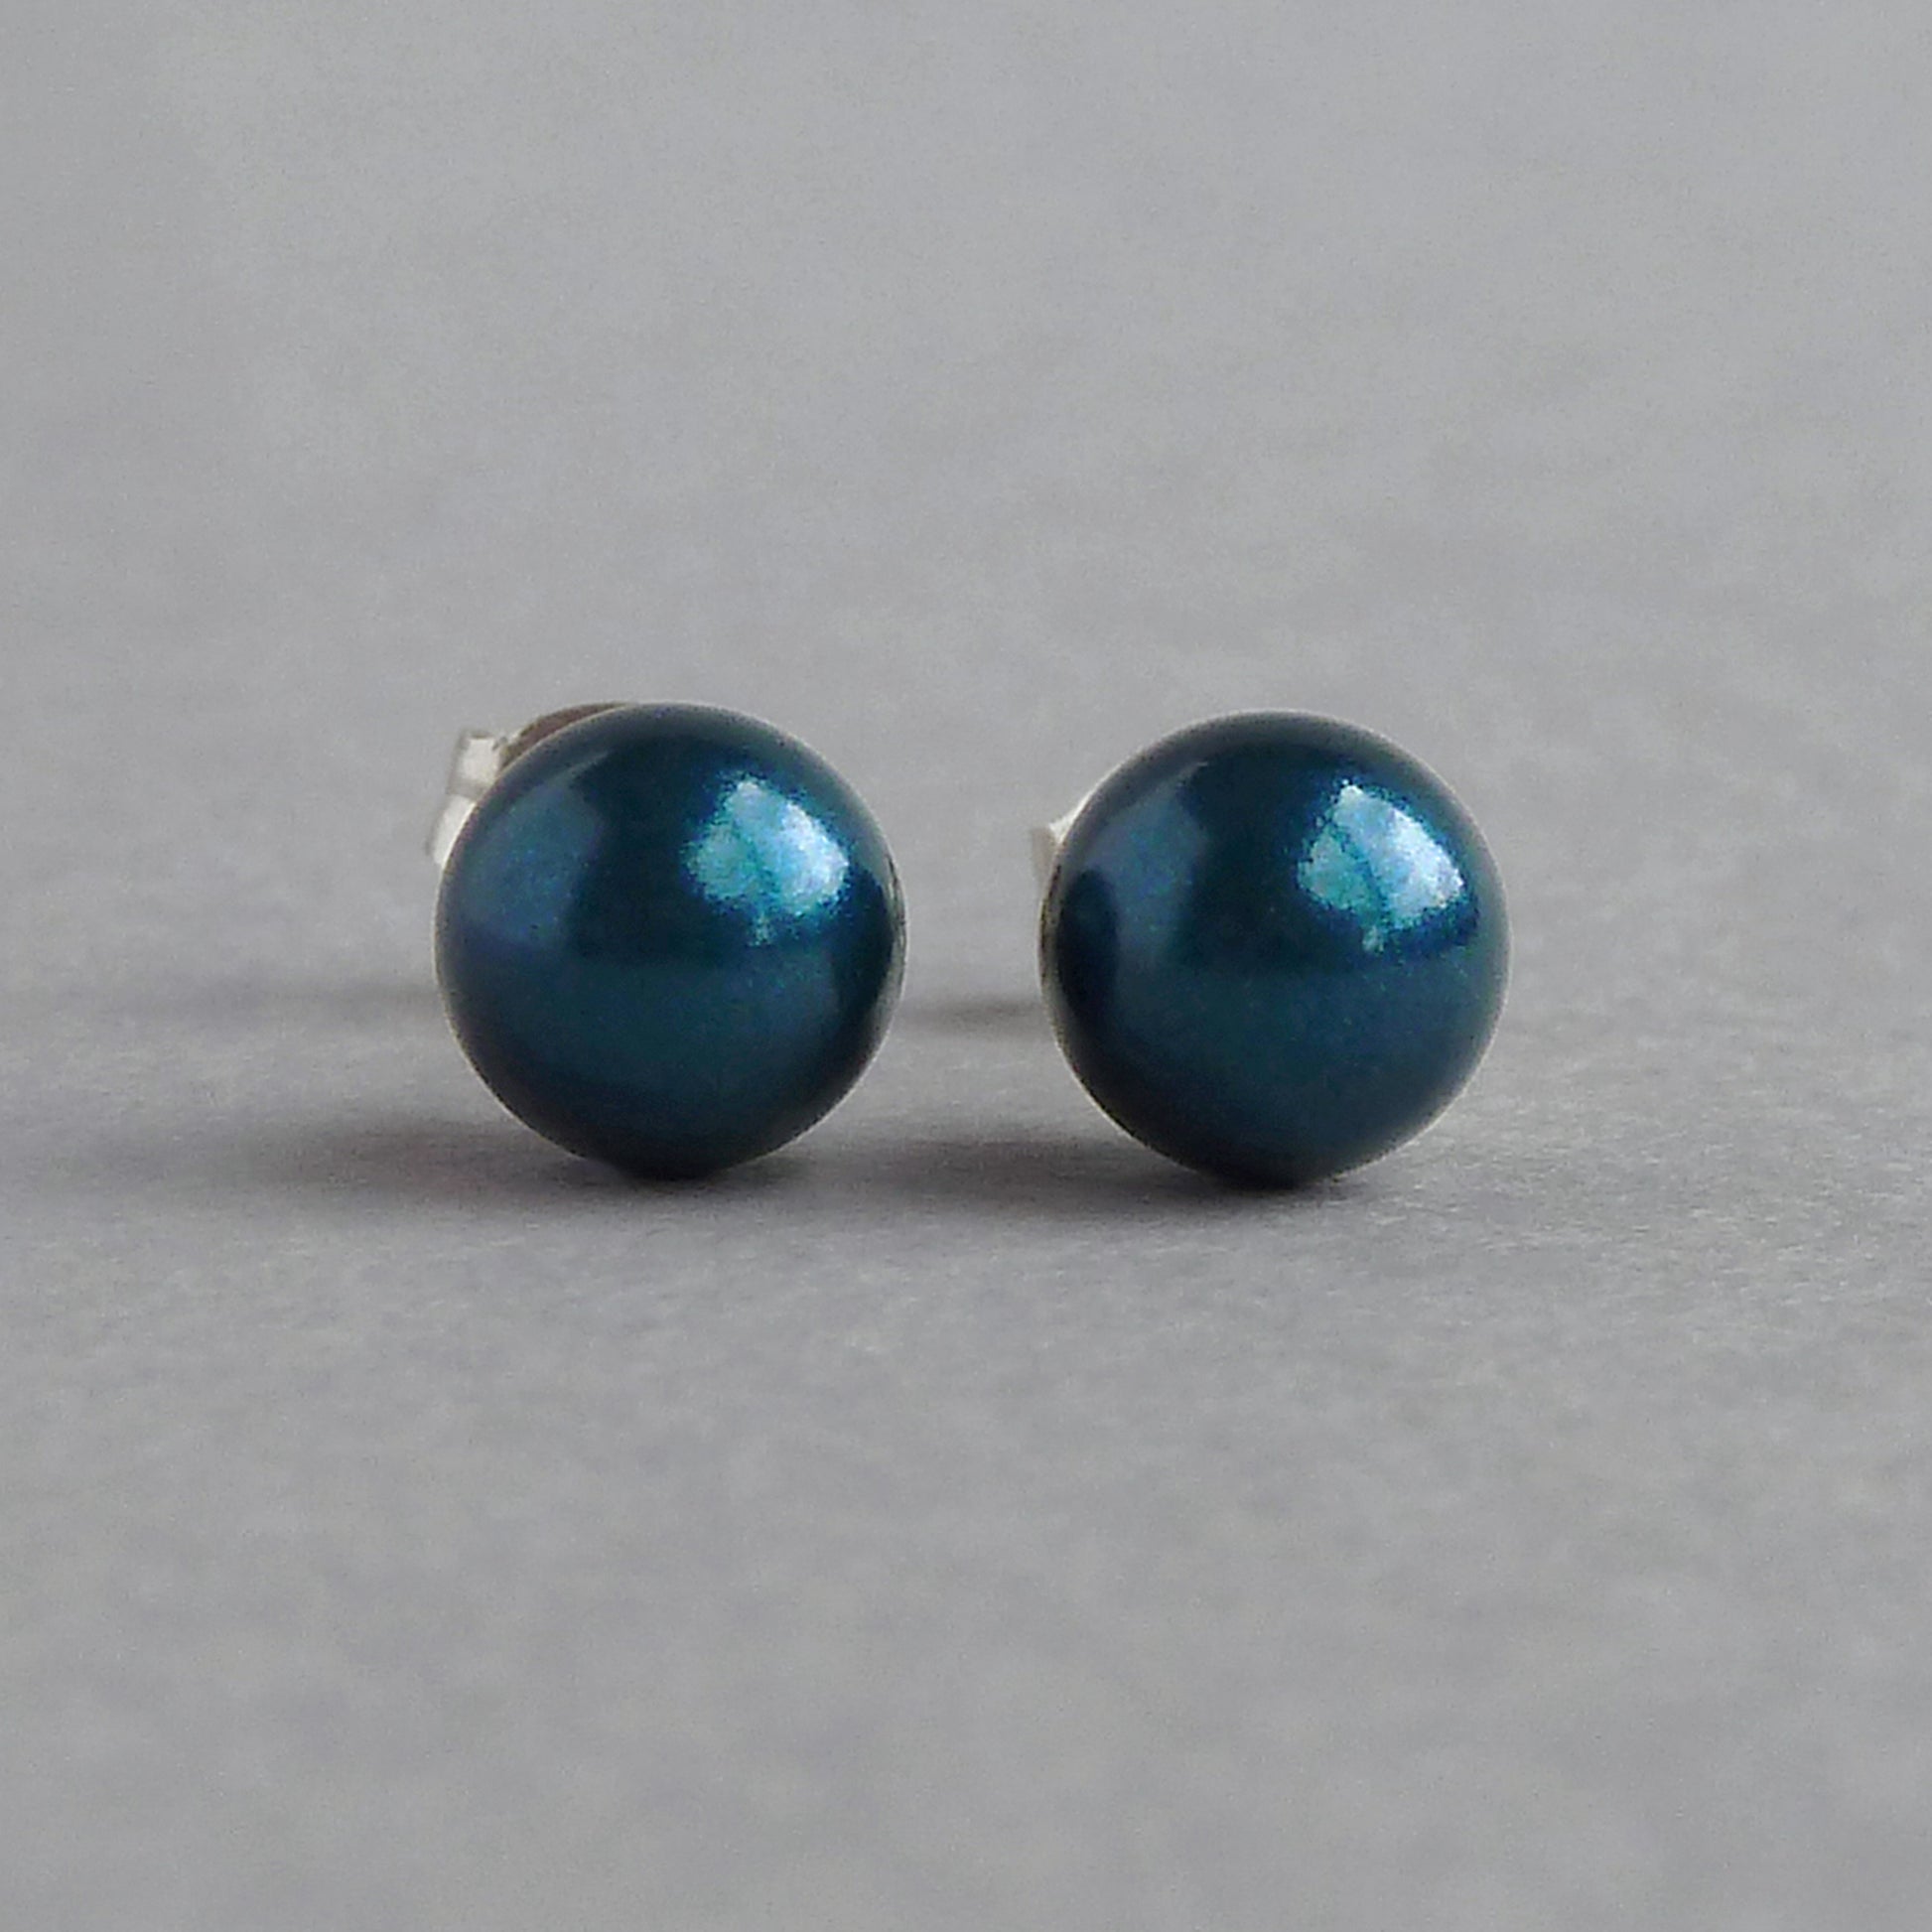 Small, round, teal, stud earrings